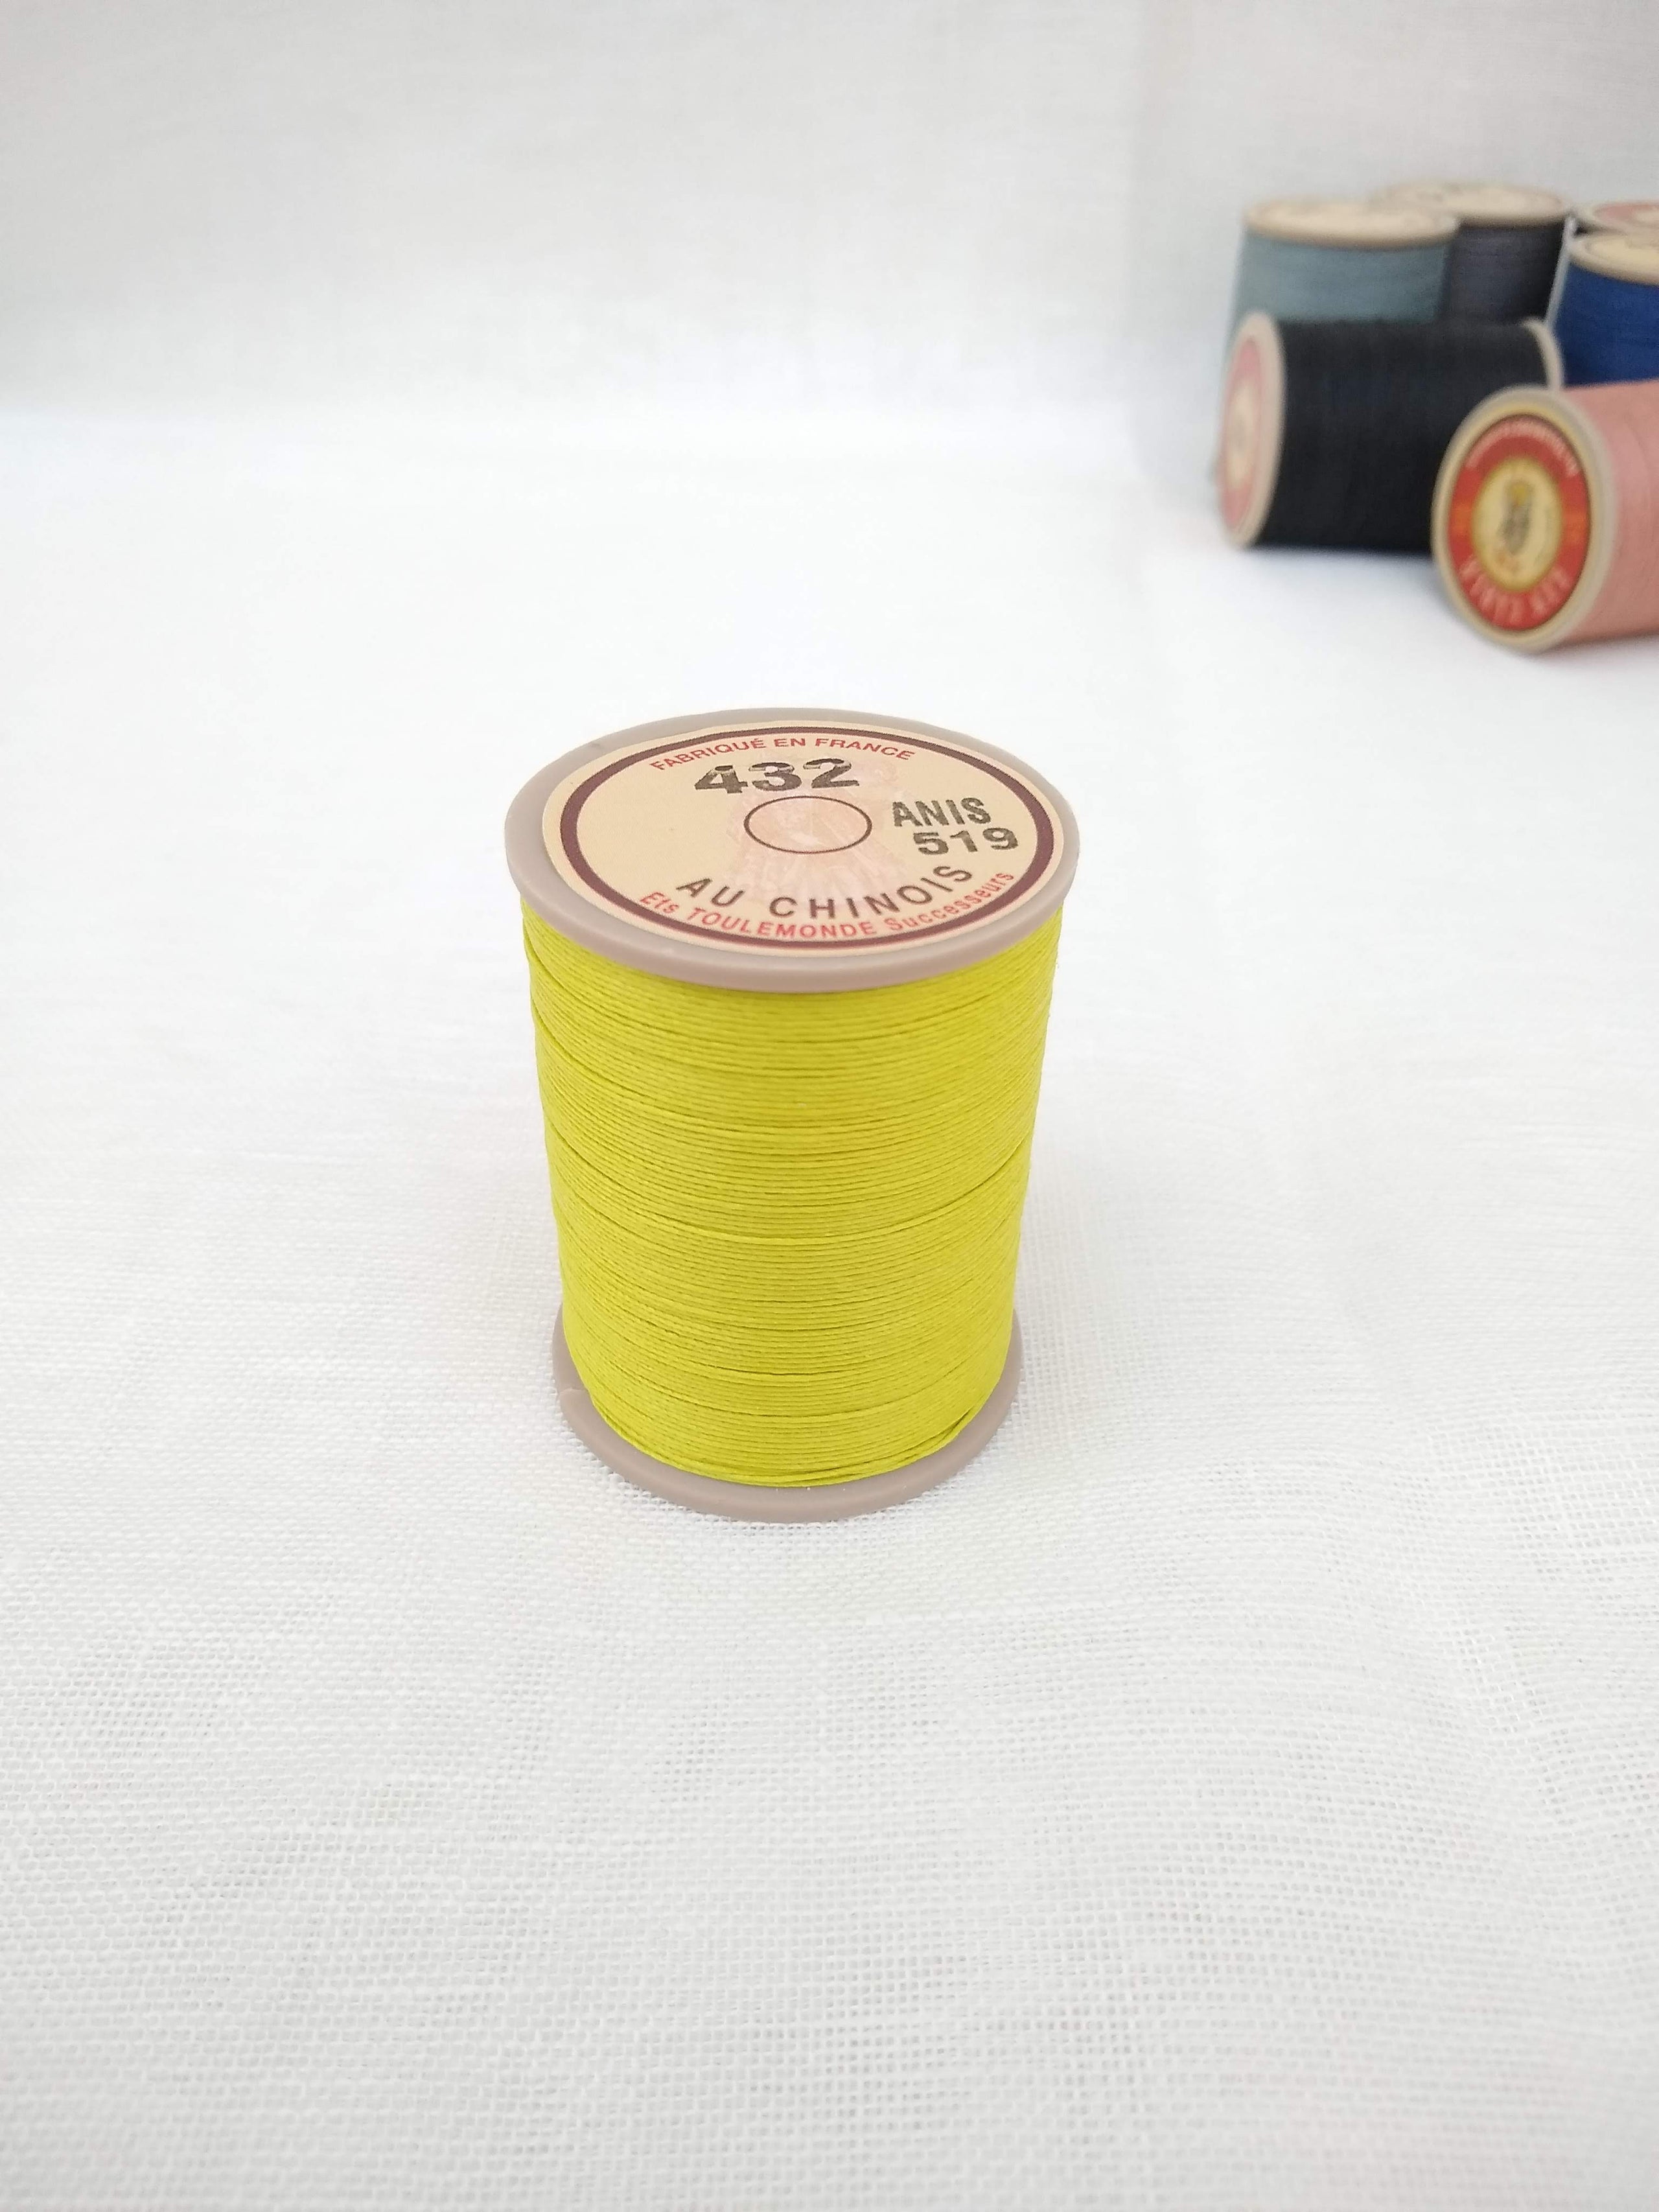 Fil au Chinois No.432 Waxed Lin Cable Leather craft Linen Thread 0.63mm  spool